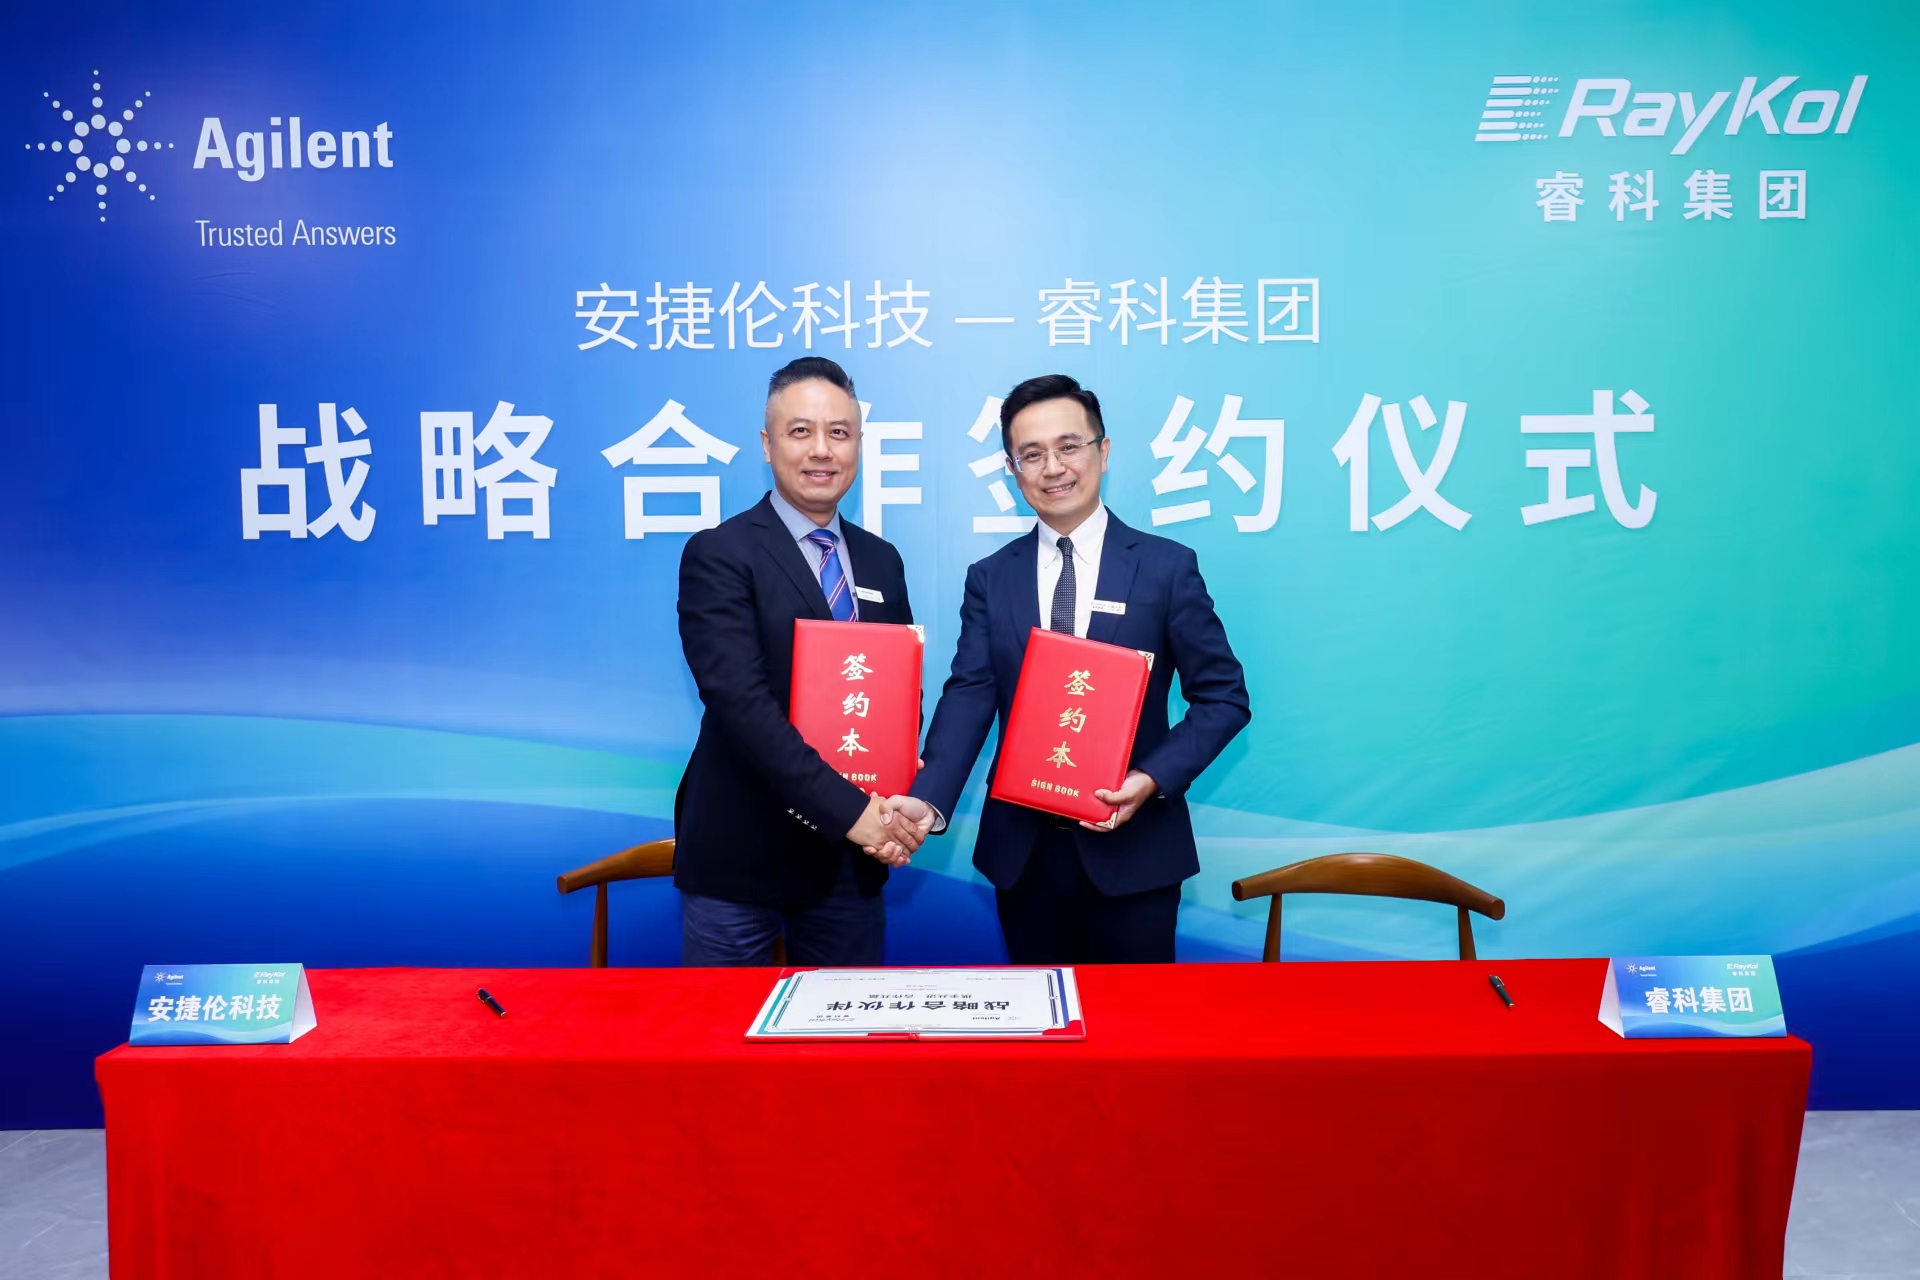 Agilent Technologies(China) and RayKol Group Achieve Strategic Partnership to Promote Innovation for Laboratory Automation Solutions